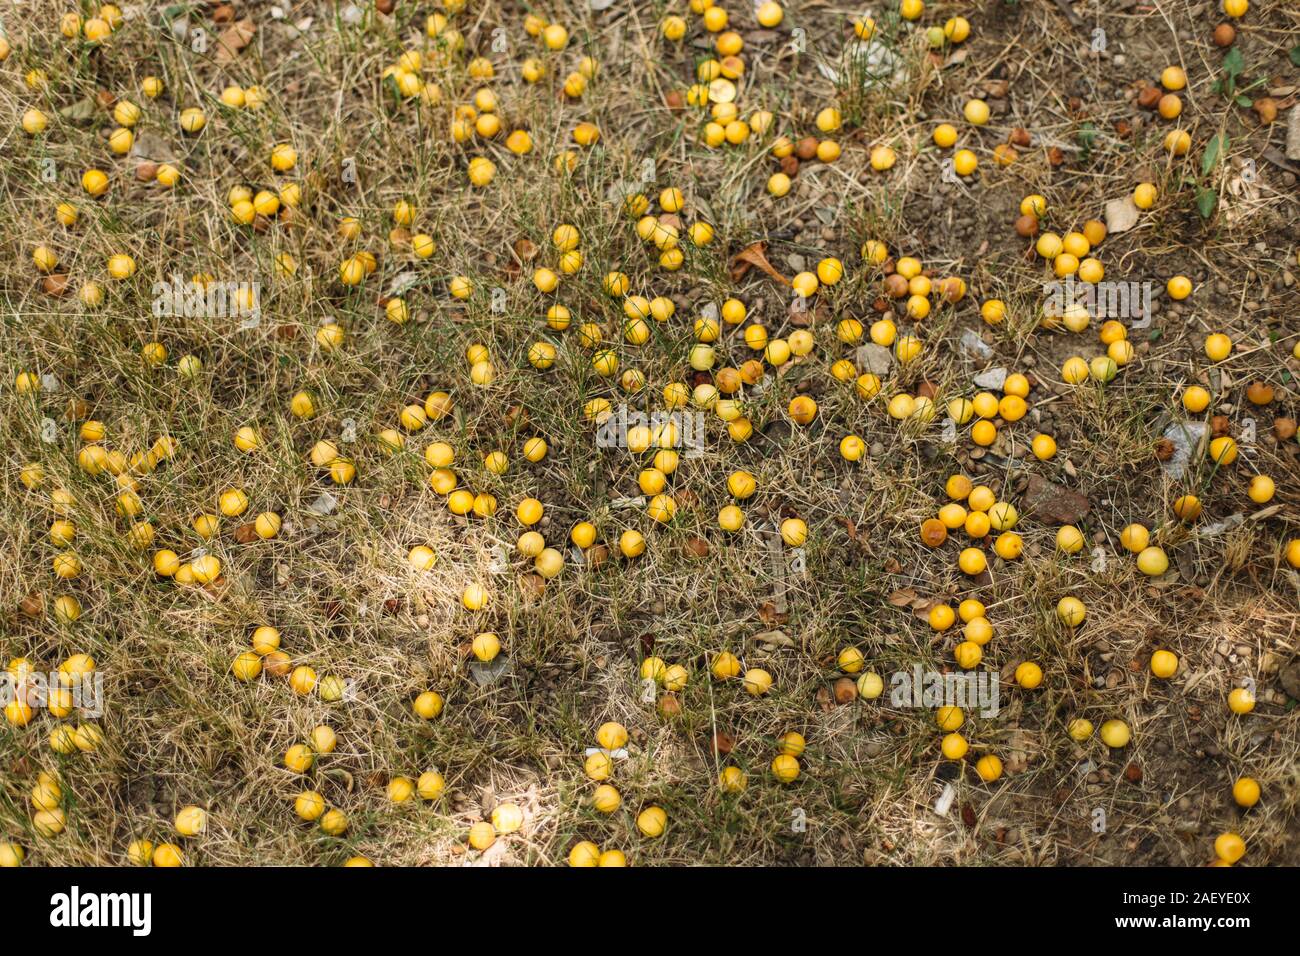 Yellow plums on the grass Stock Photo